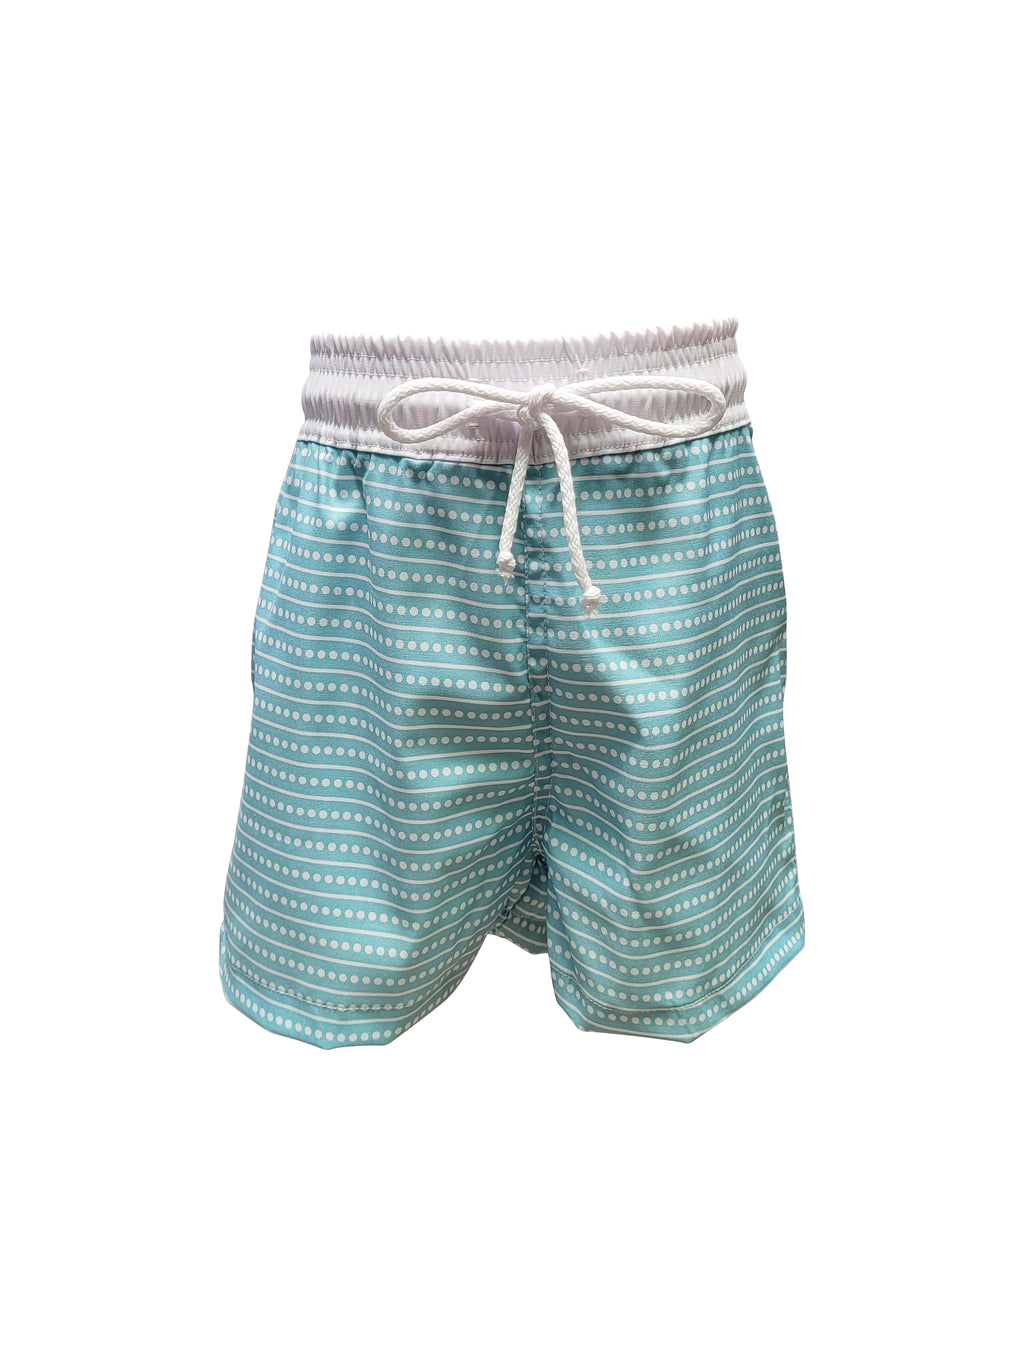 Teal stripes and dots baby boy swim trunks - Little Threads Inc. Children's Clothing